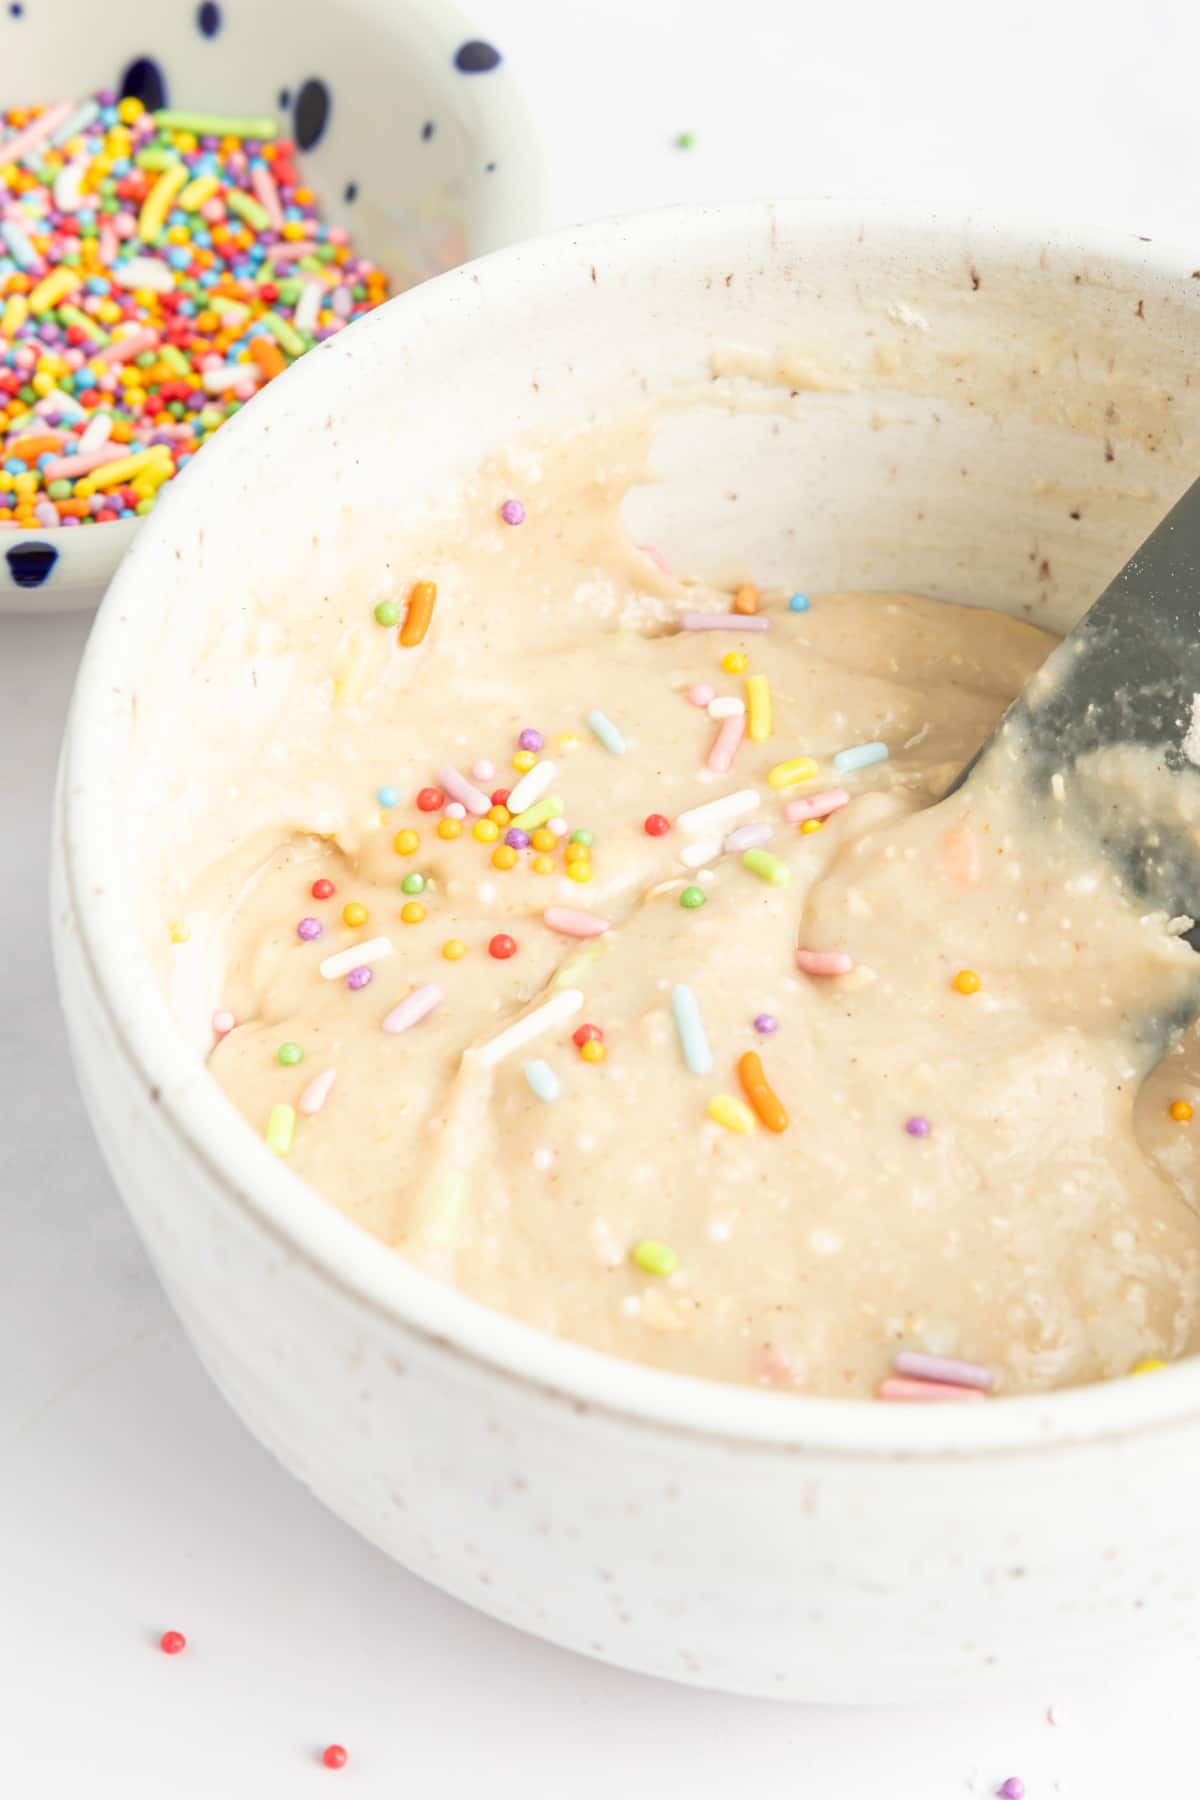 Pale tan muffin batter with pastel colored sprinkles in a white mixing bowl, sitting next to a small bowl of those pastel sprinkles.